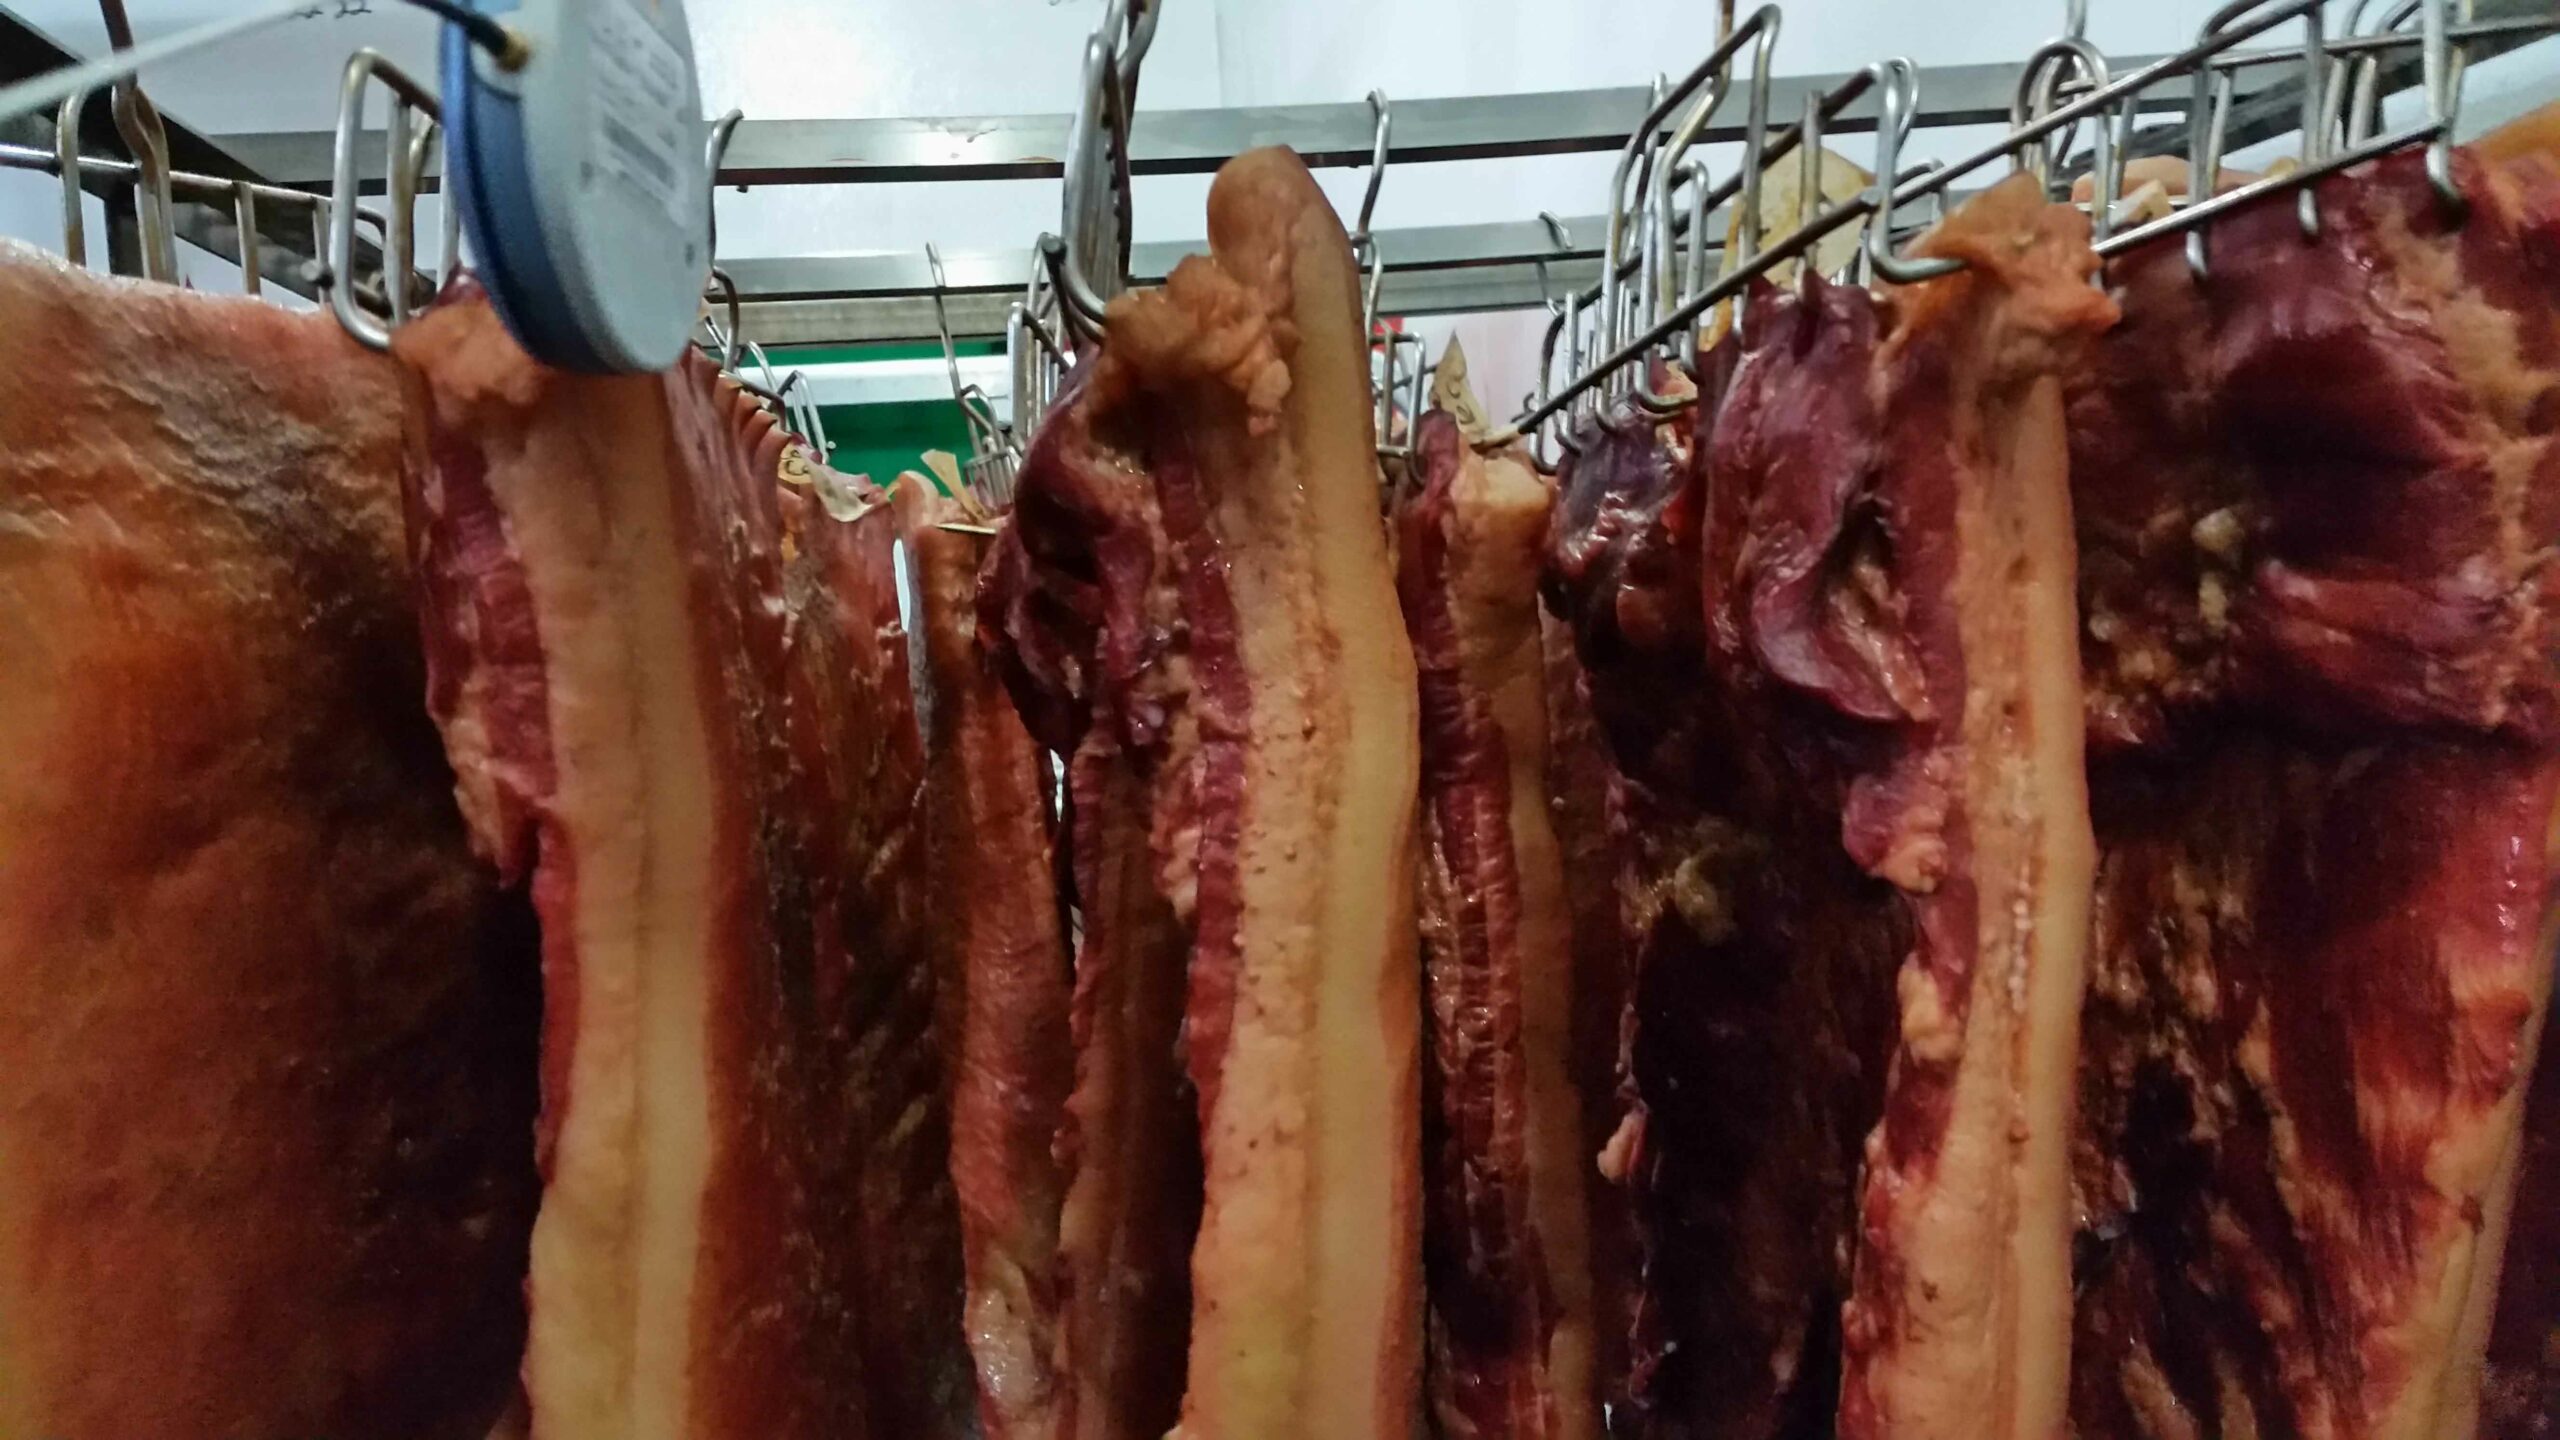 Curing pork at Century Oak Packing Co